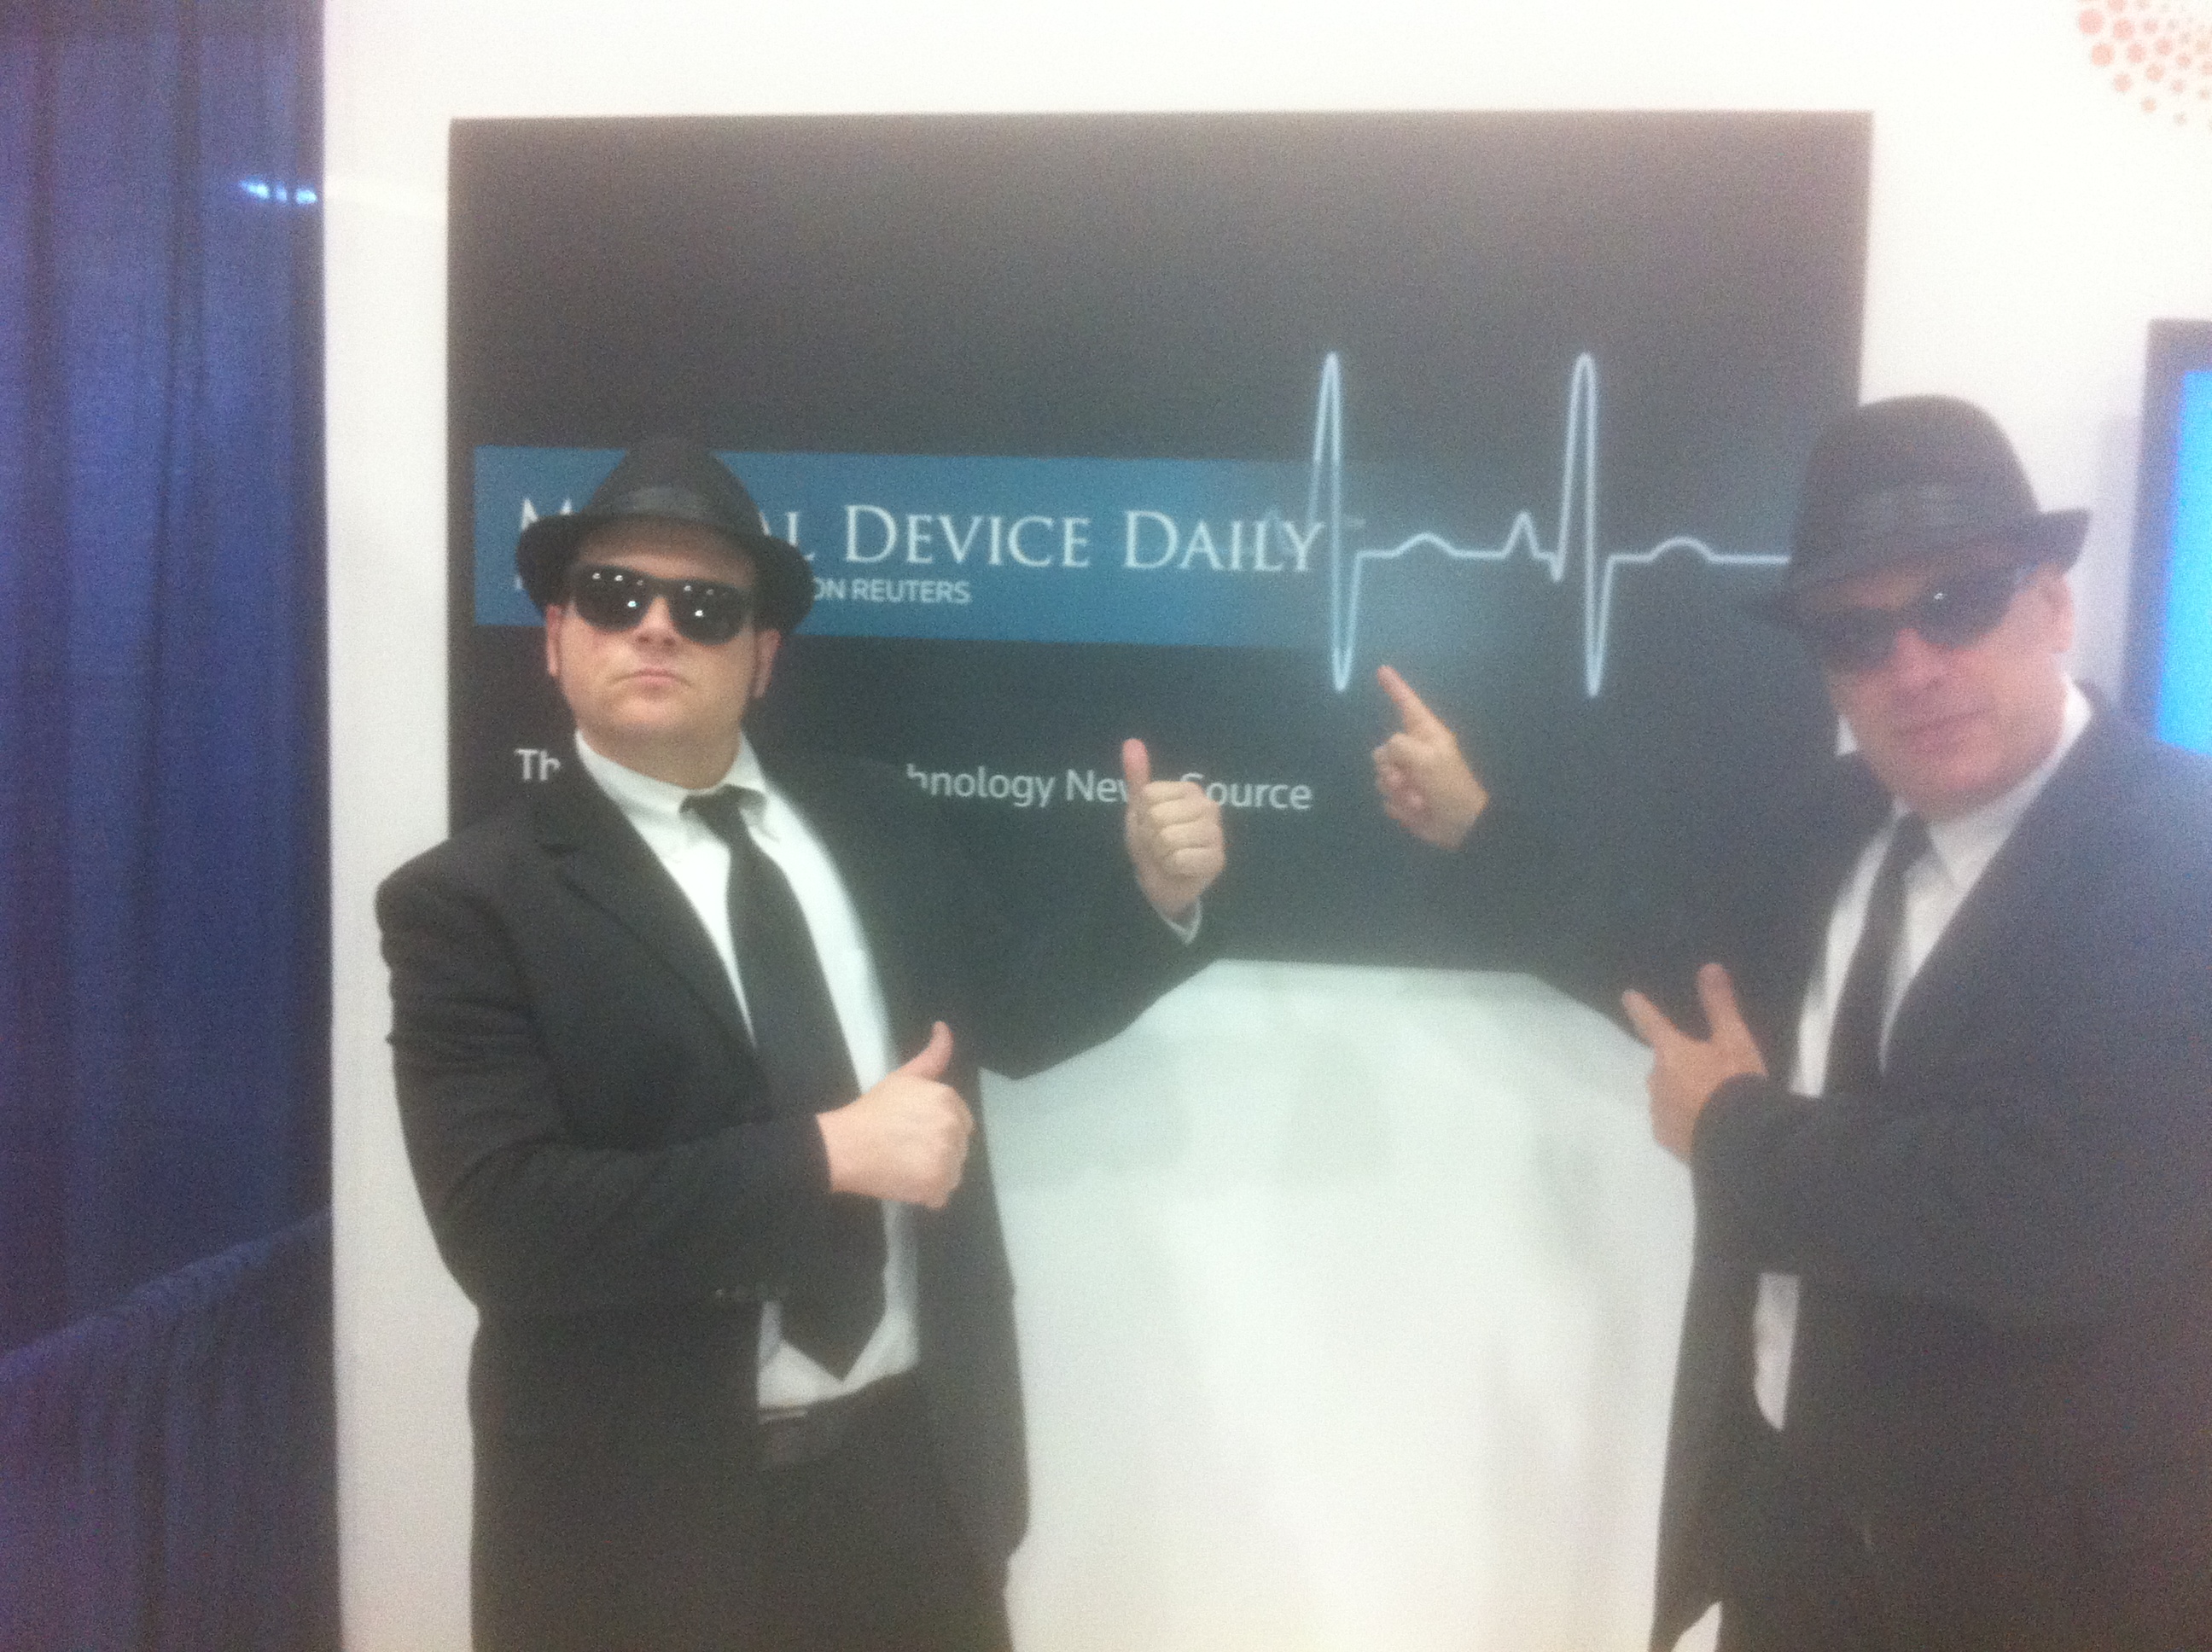 Medical Device Daily is Blues Brother-approved